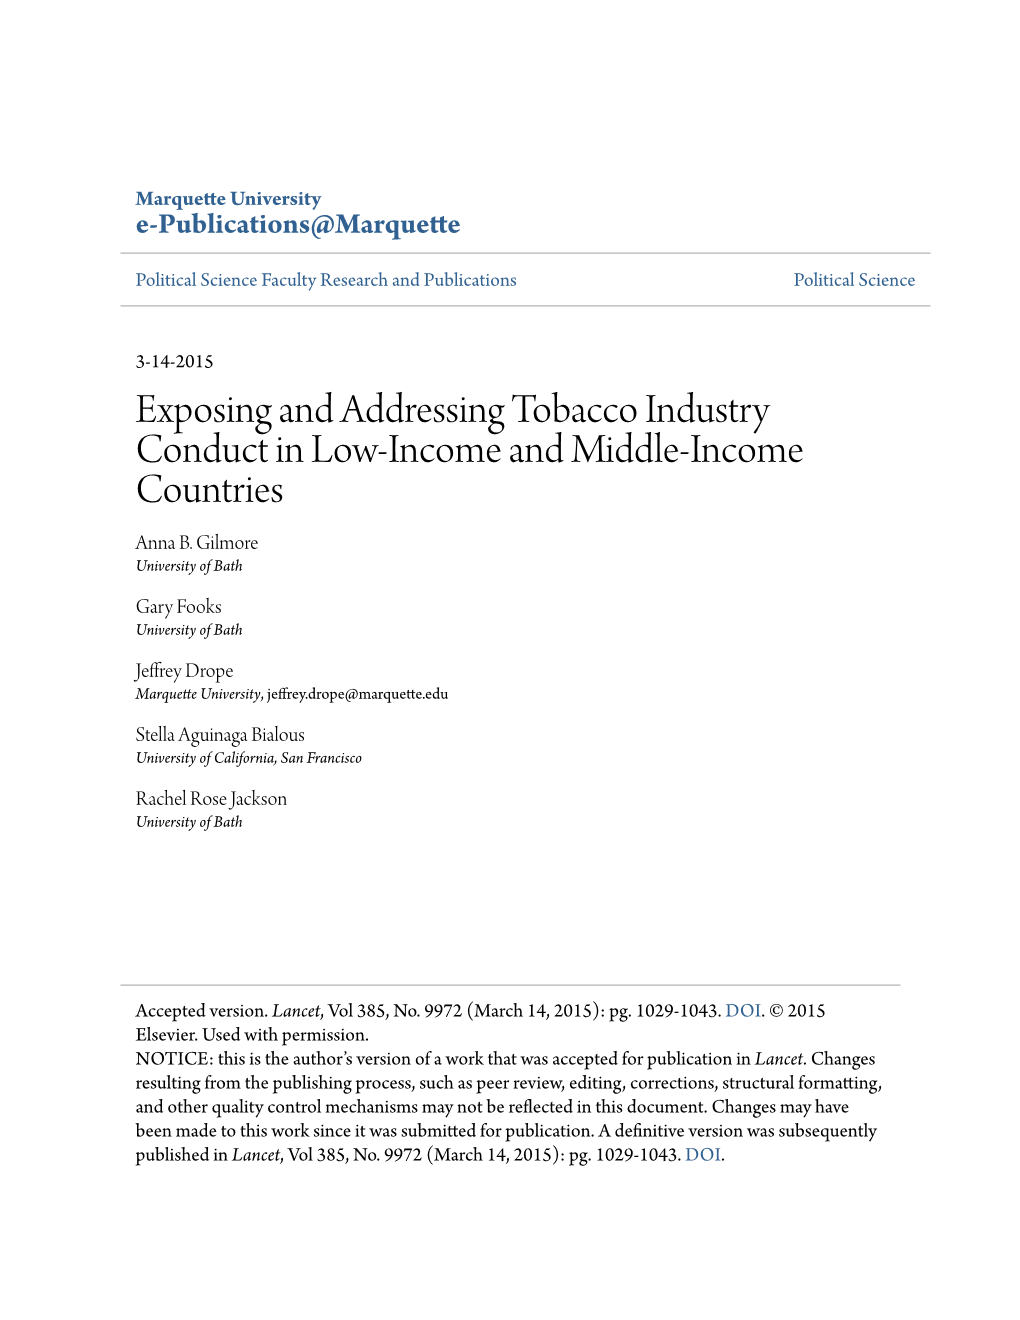 Exposing and Addressing Tobacco Industry Conduct in Low-Income and Middle-Income Countries Anna B